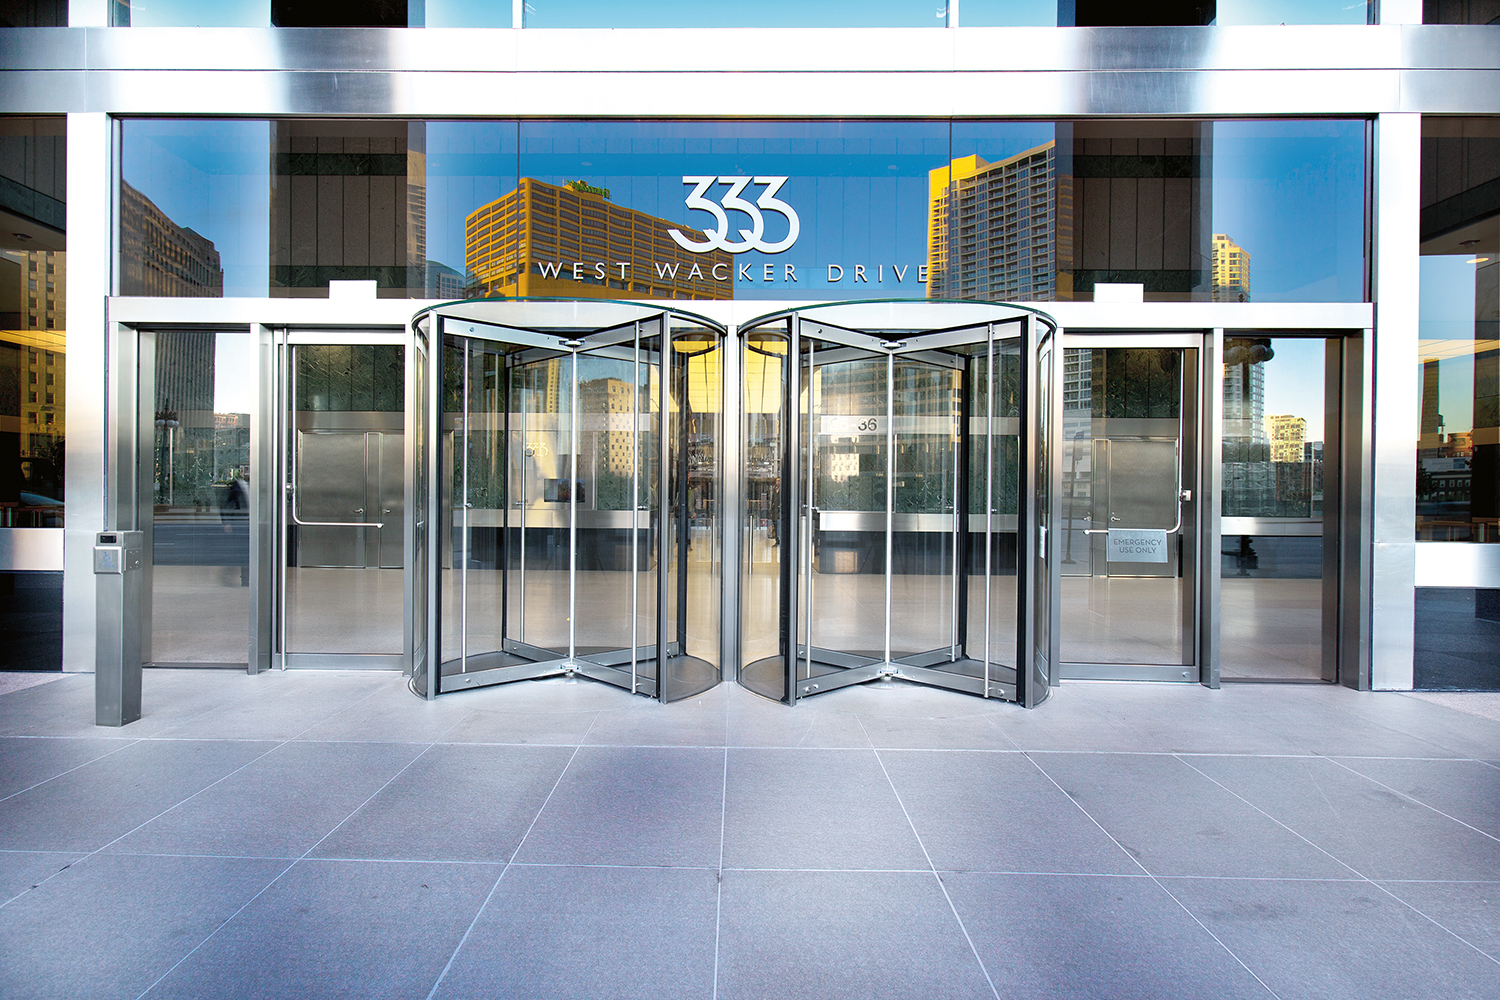 A photo of an architectural building product. An exterior entrance to a large building, showing glass revolving doors.